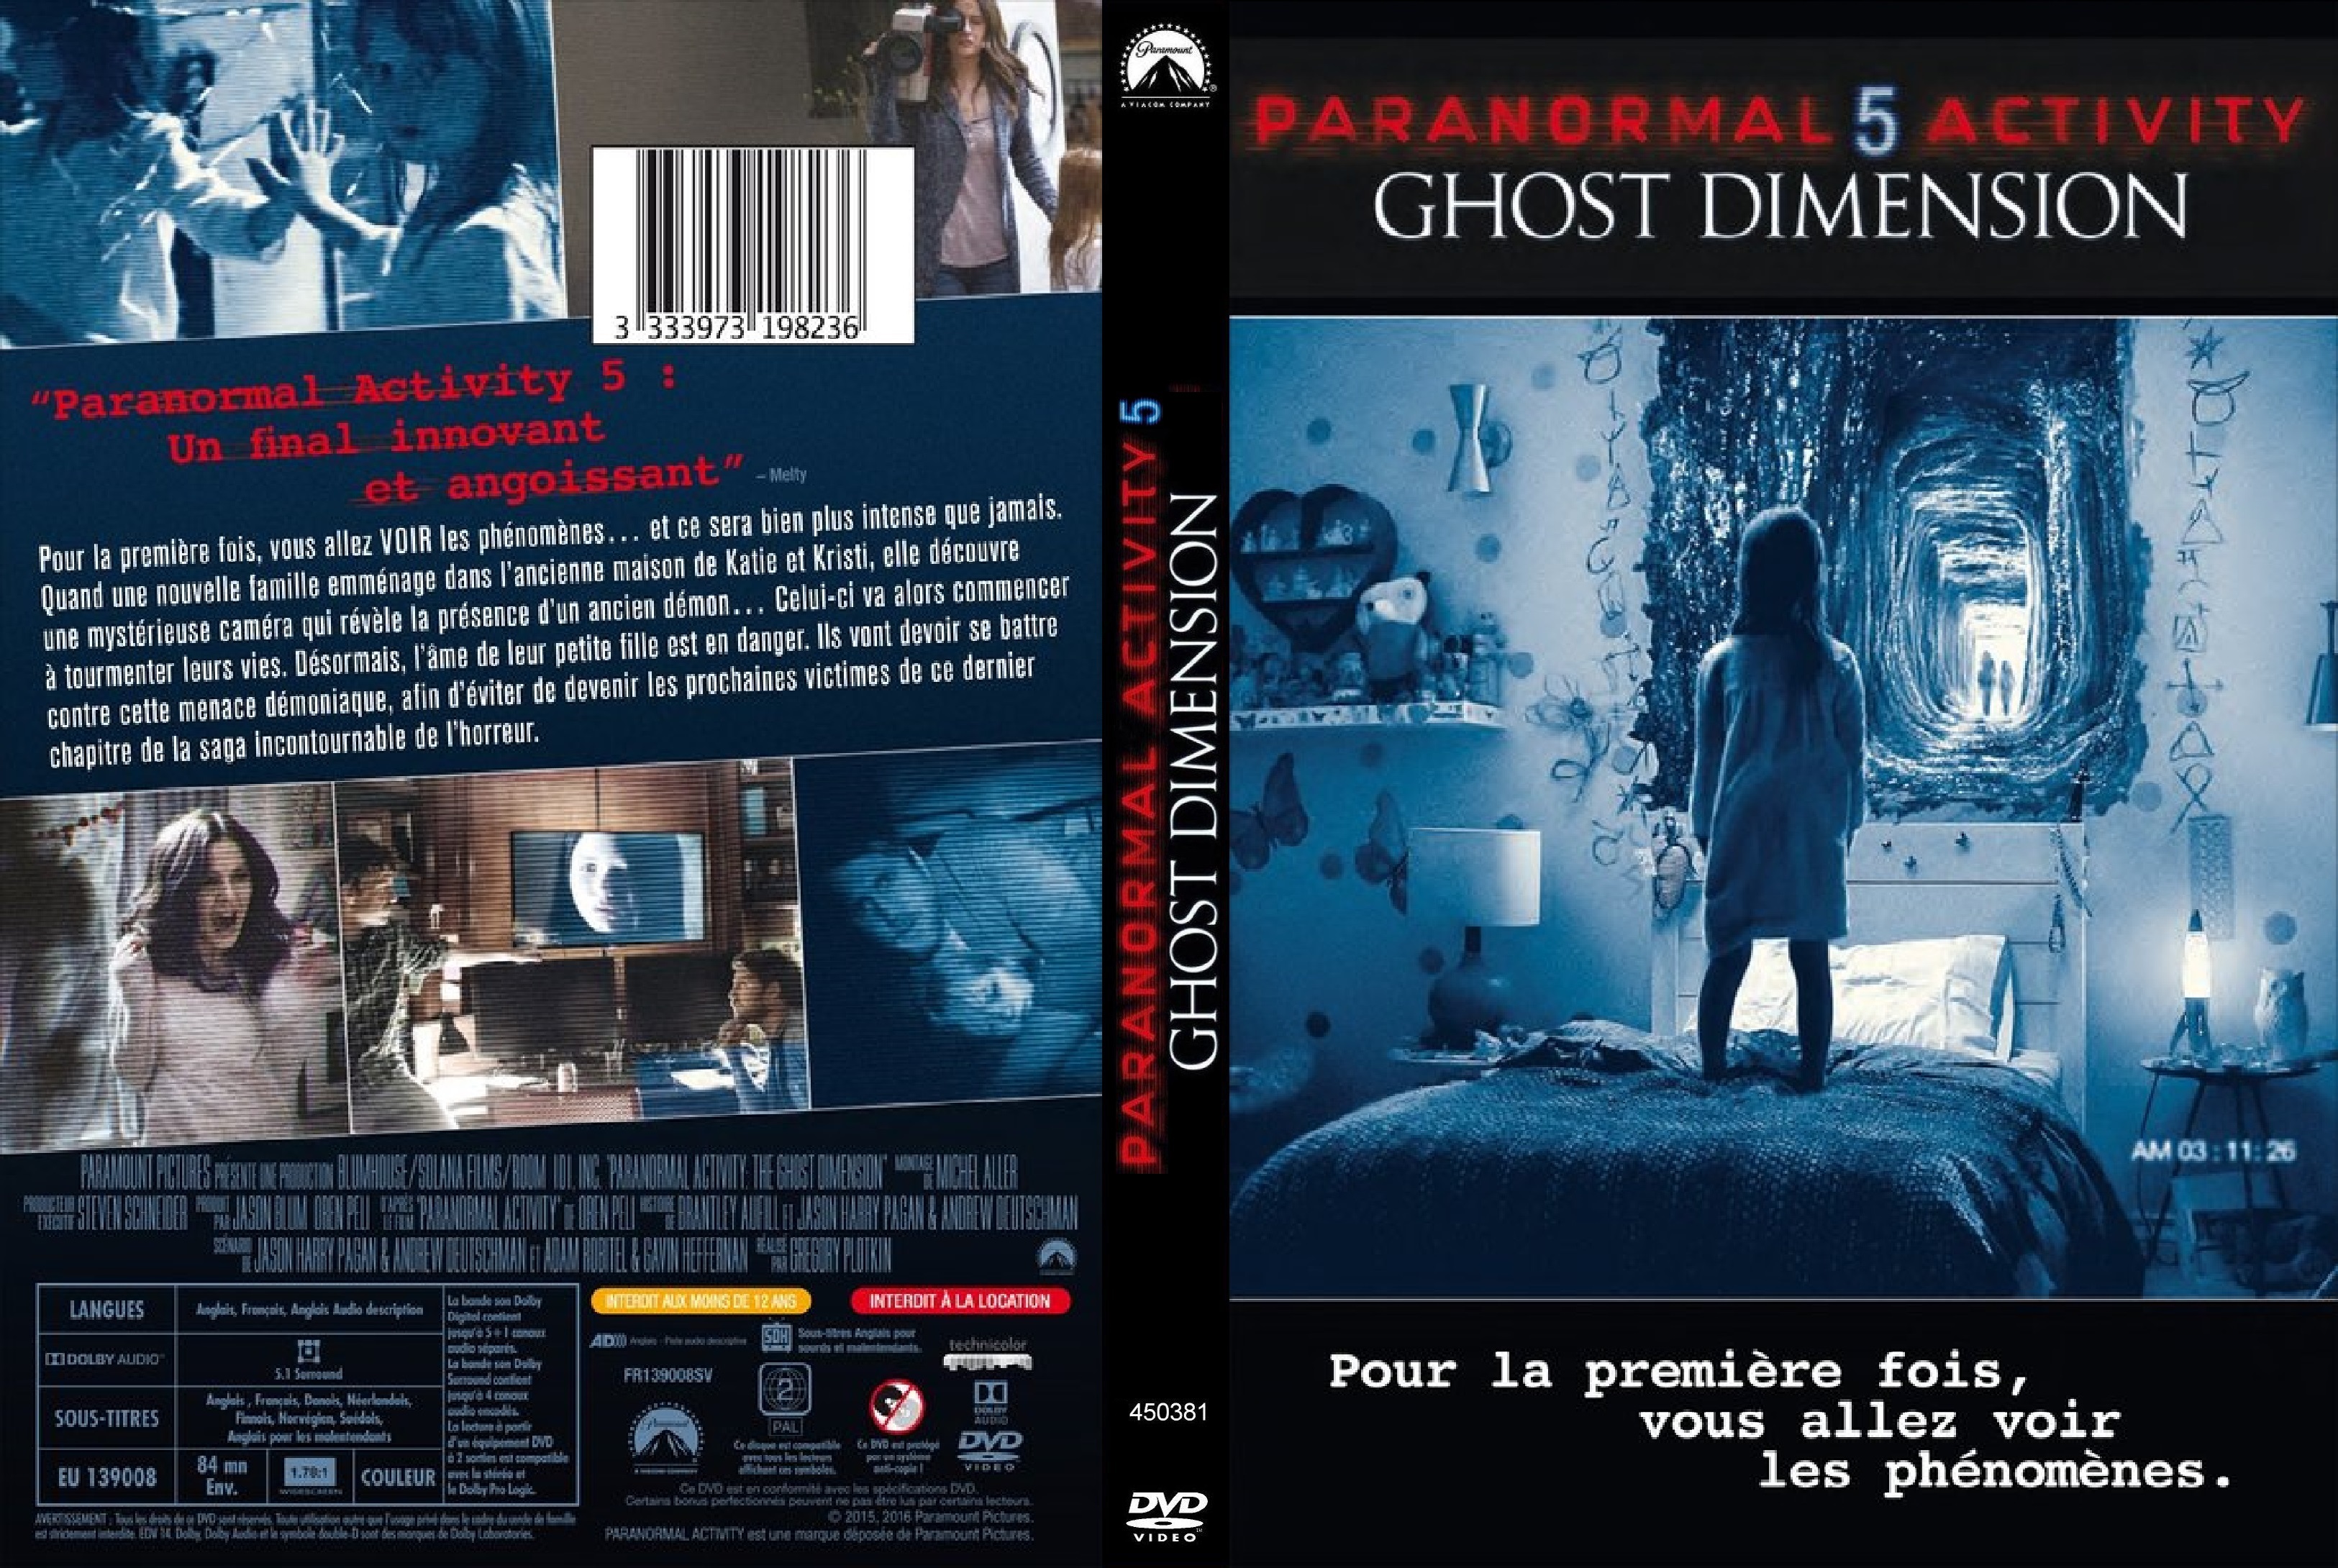 Jaquette DVD Paranormal Activity 5 Ghost Dimension custom v2